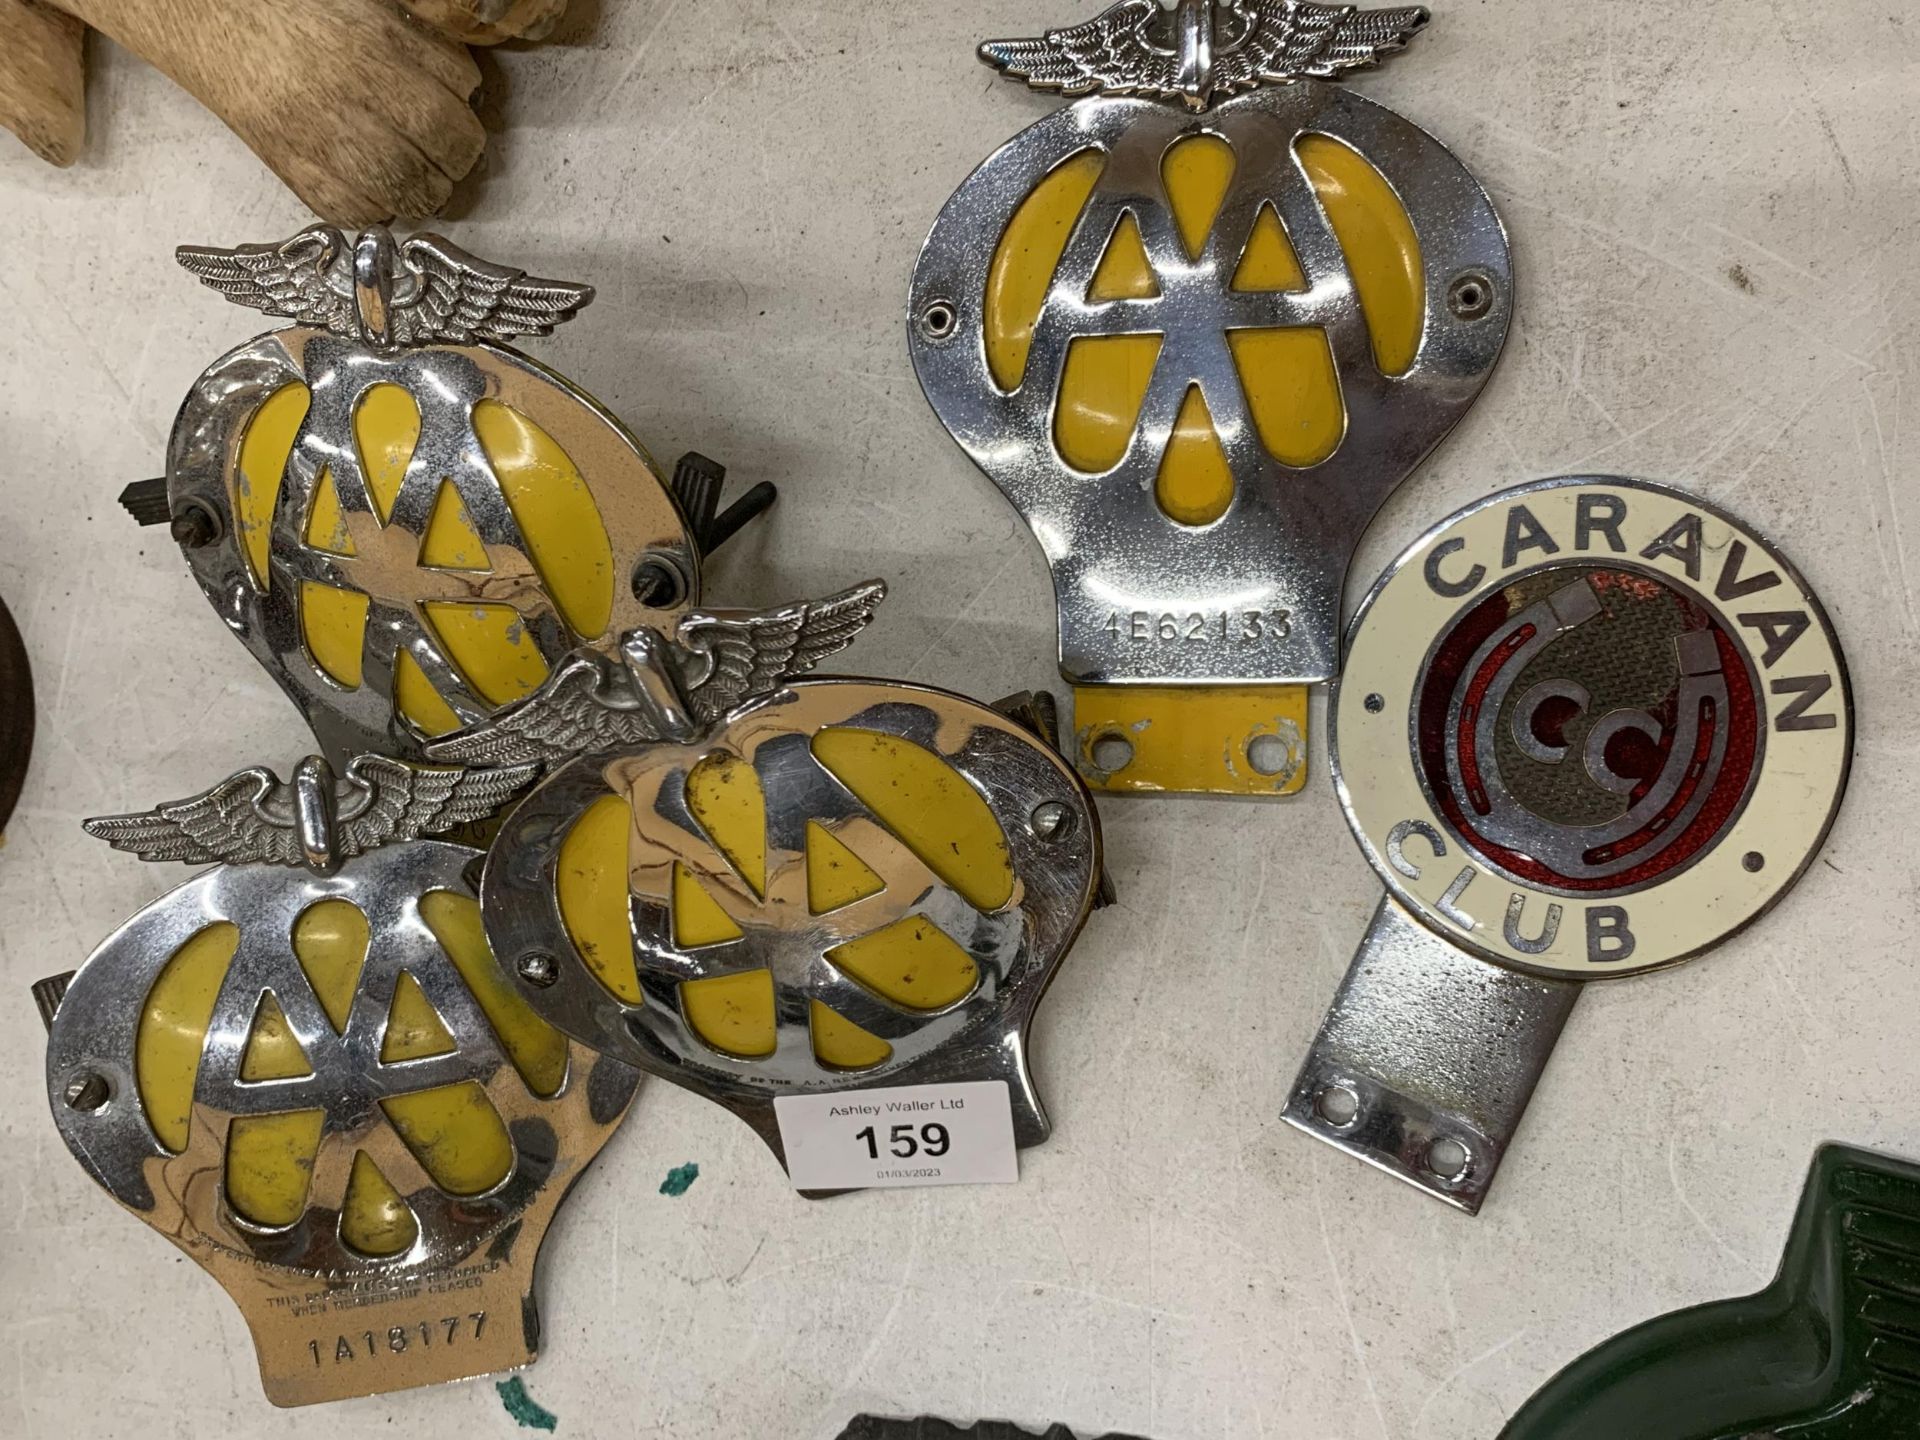 AQUANTITY OF VINTAGE CAR BADGES TO INCLUDE THE A A AND THE CARAVAN CLUB